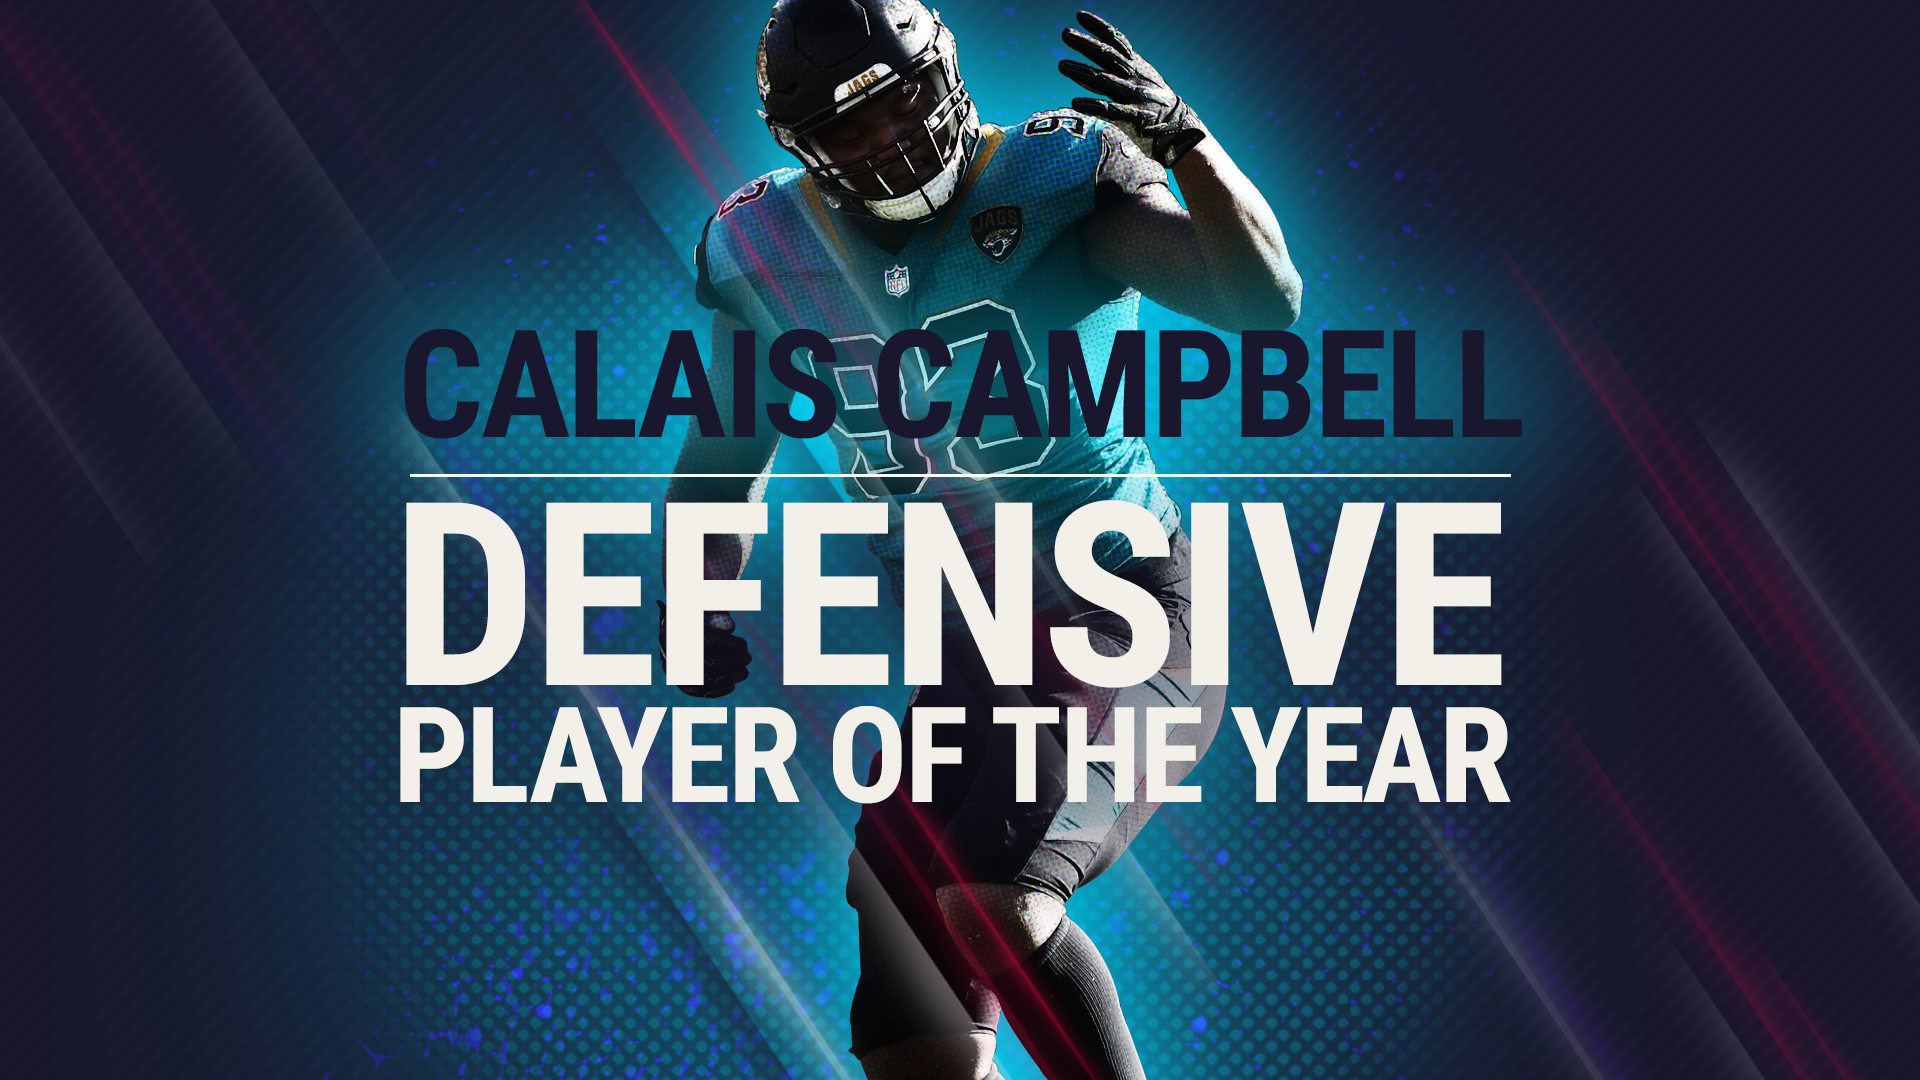 NFL players vote Calais Campbell Sporting News Defensive Player